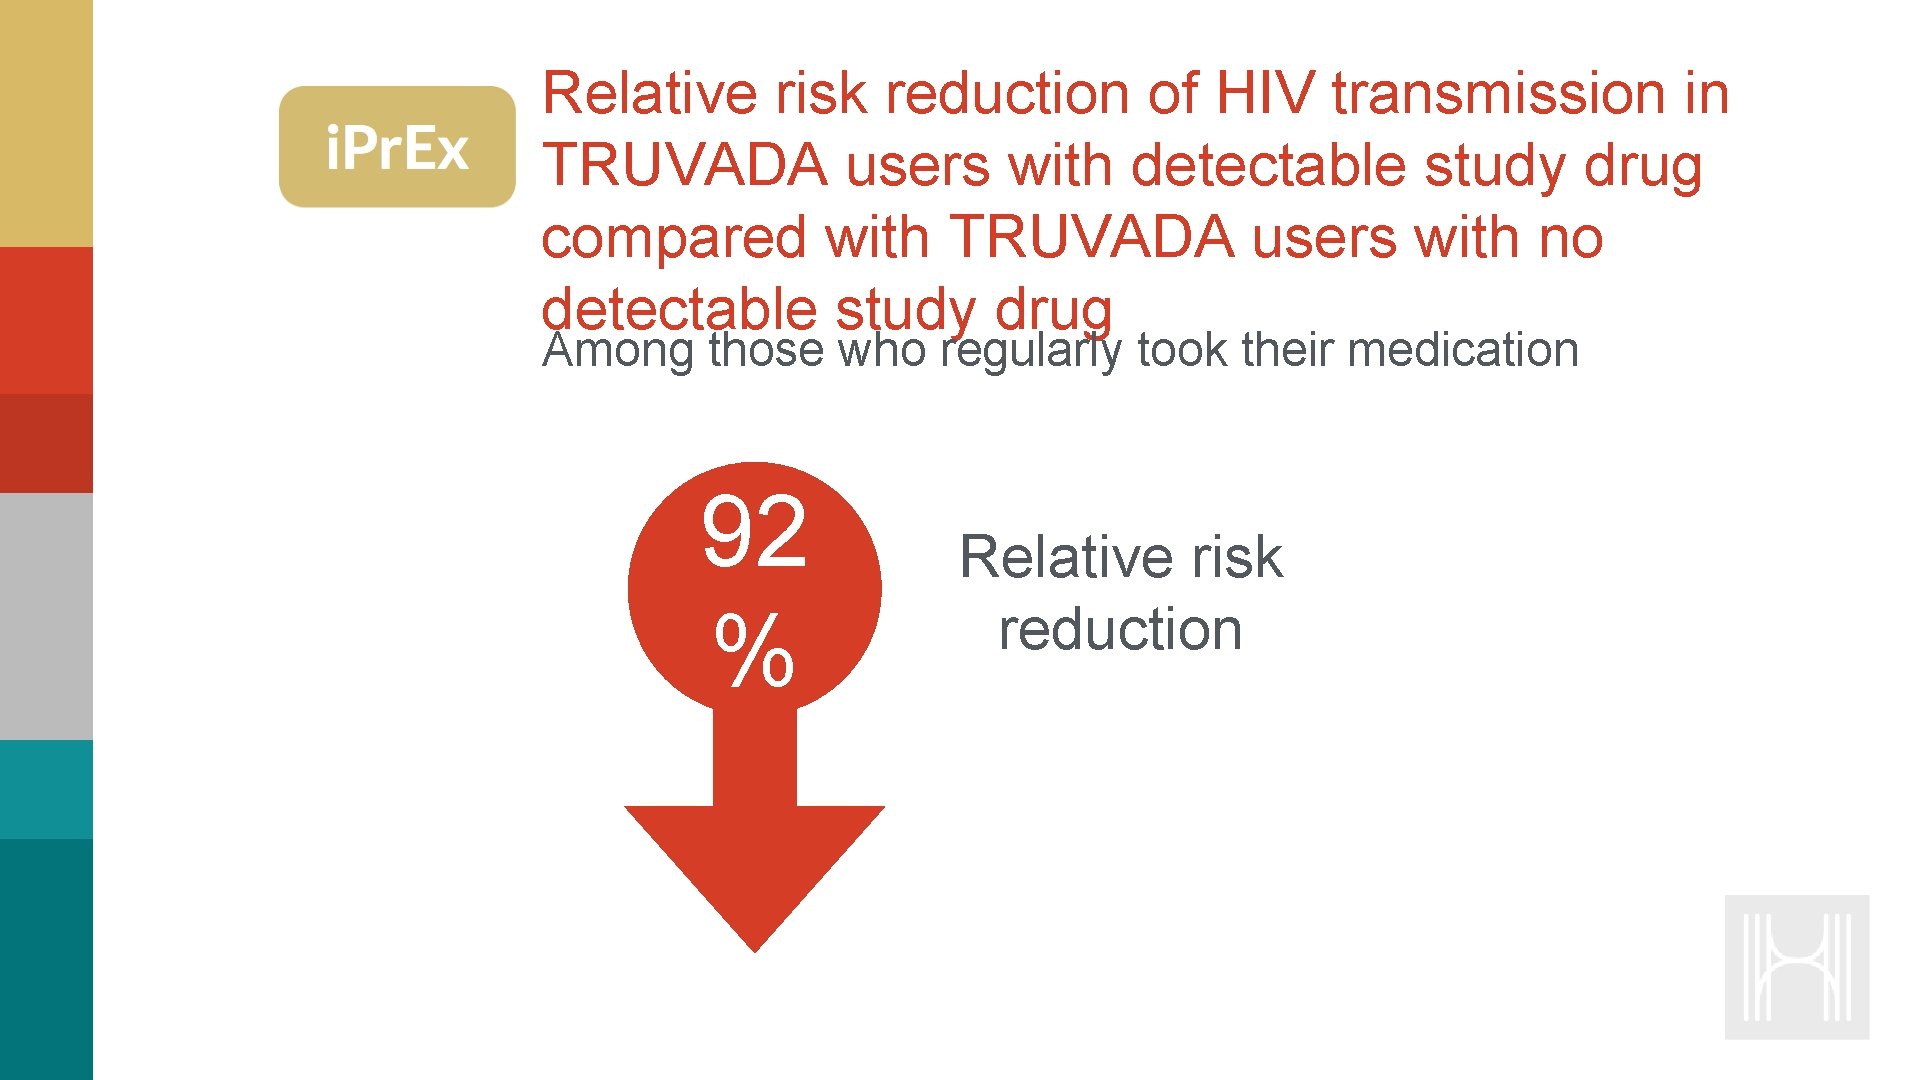 Relative risk reduction of HIV transmission in TRUVADA users with detectable study drug compared